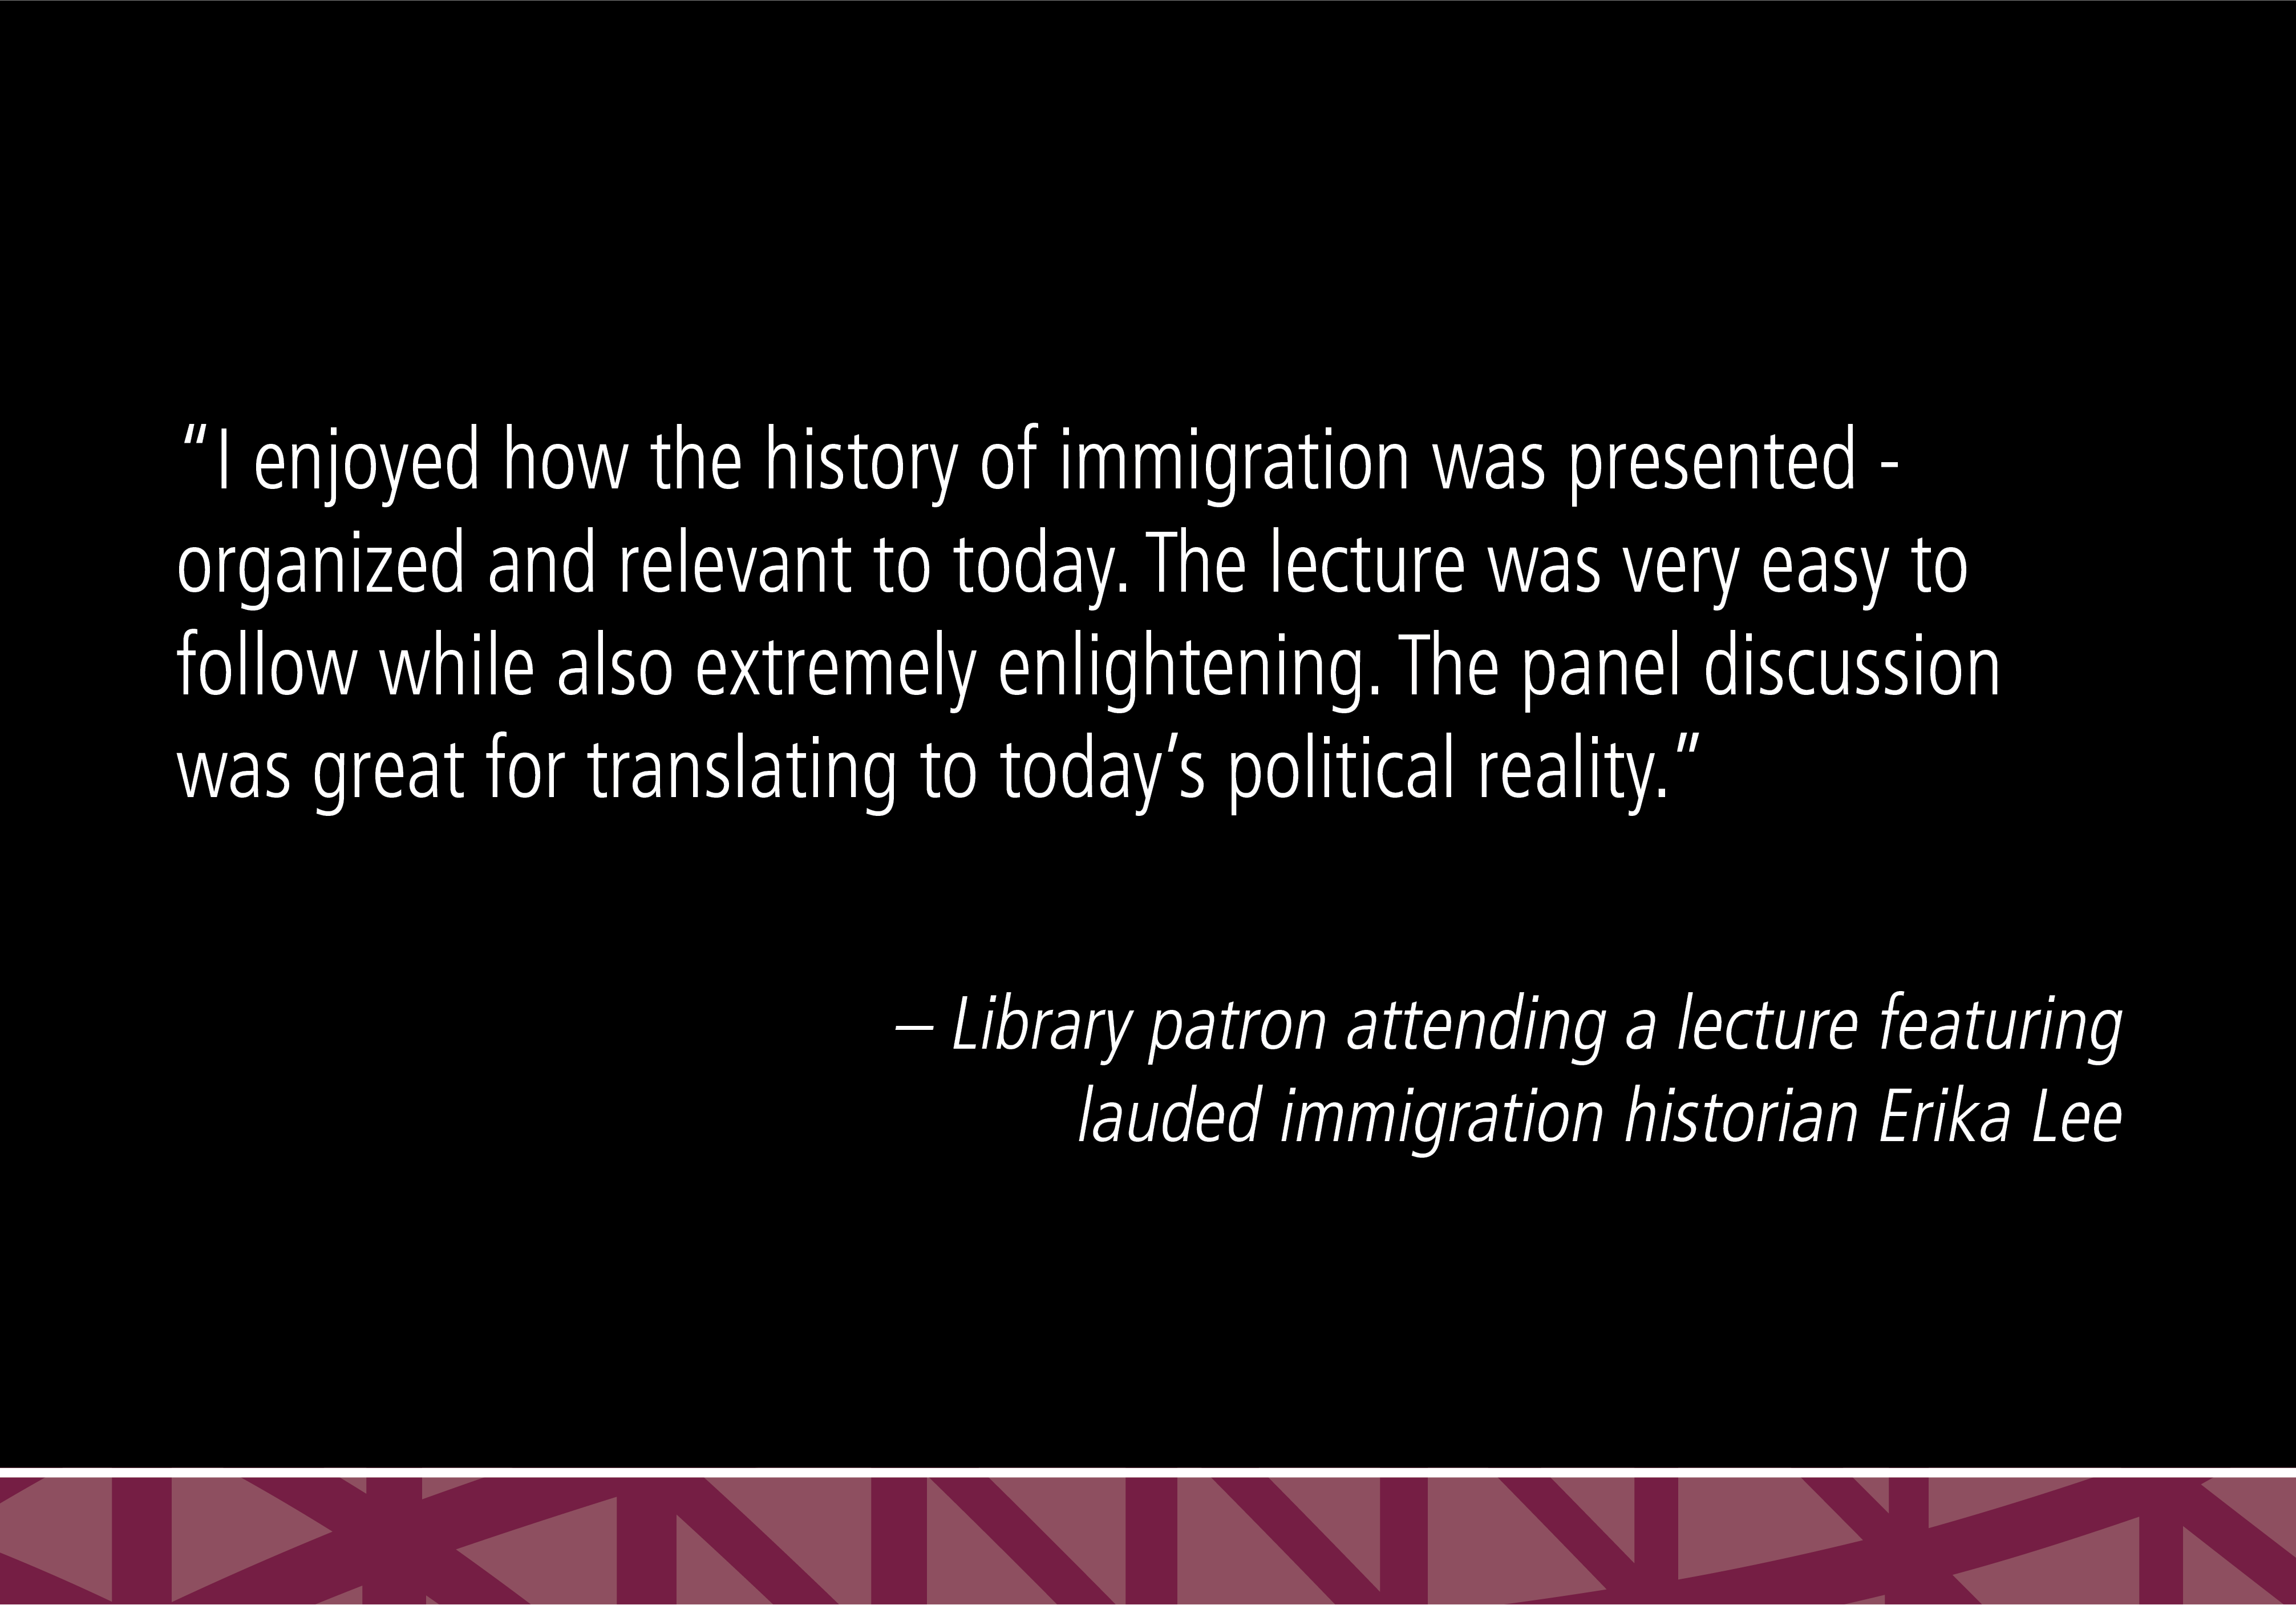 “I enjoyed how the history of immigration was presented - organized and relevant to today. The lecture was very easy to follow while also extremely enlightening. The panel discussion was great for translating to today's political reality.” - Library patron attending a lecture featuring lauded immigration historian Erika Lee